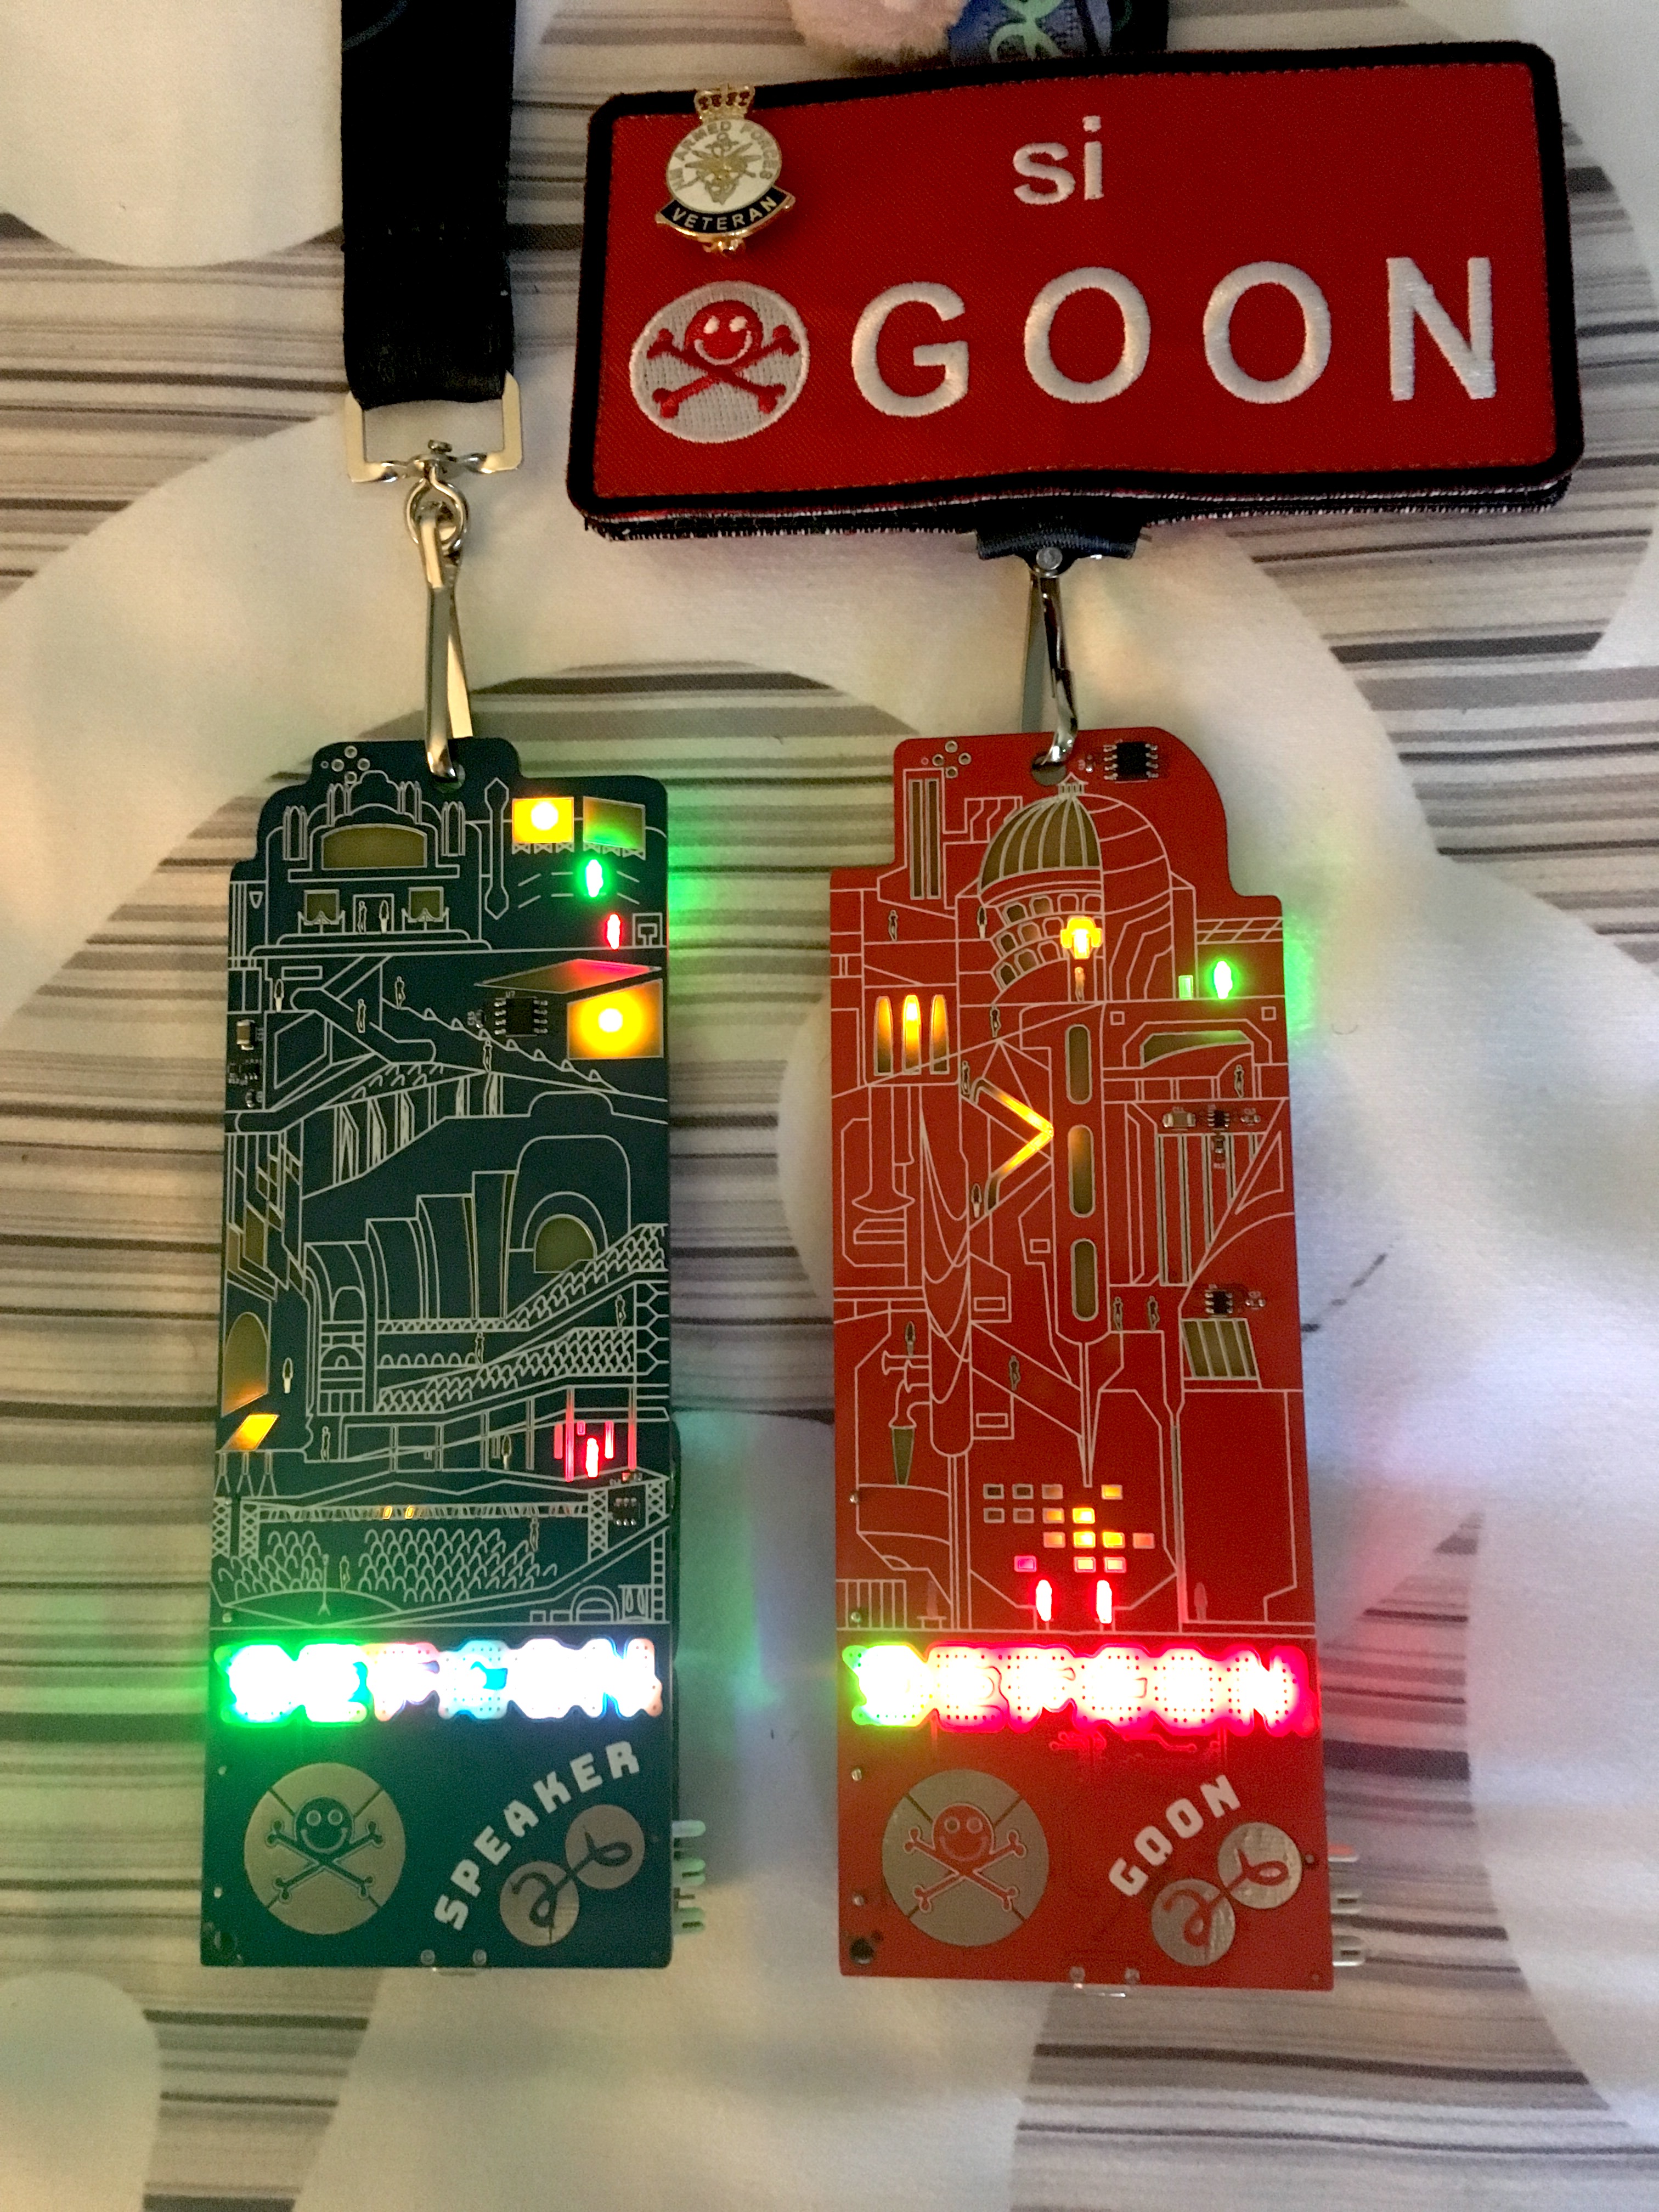 DEF CON 26 Goon and Speaker badges